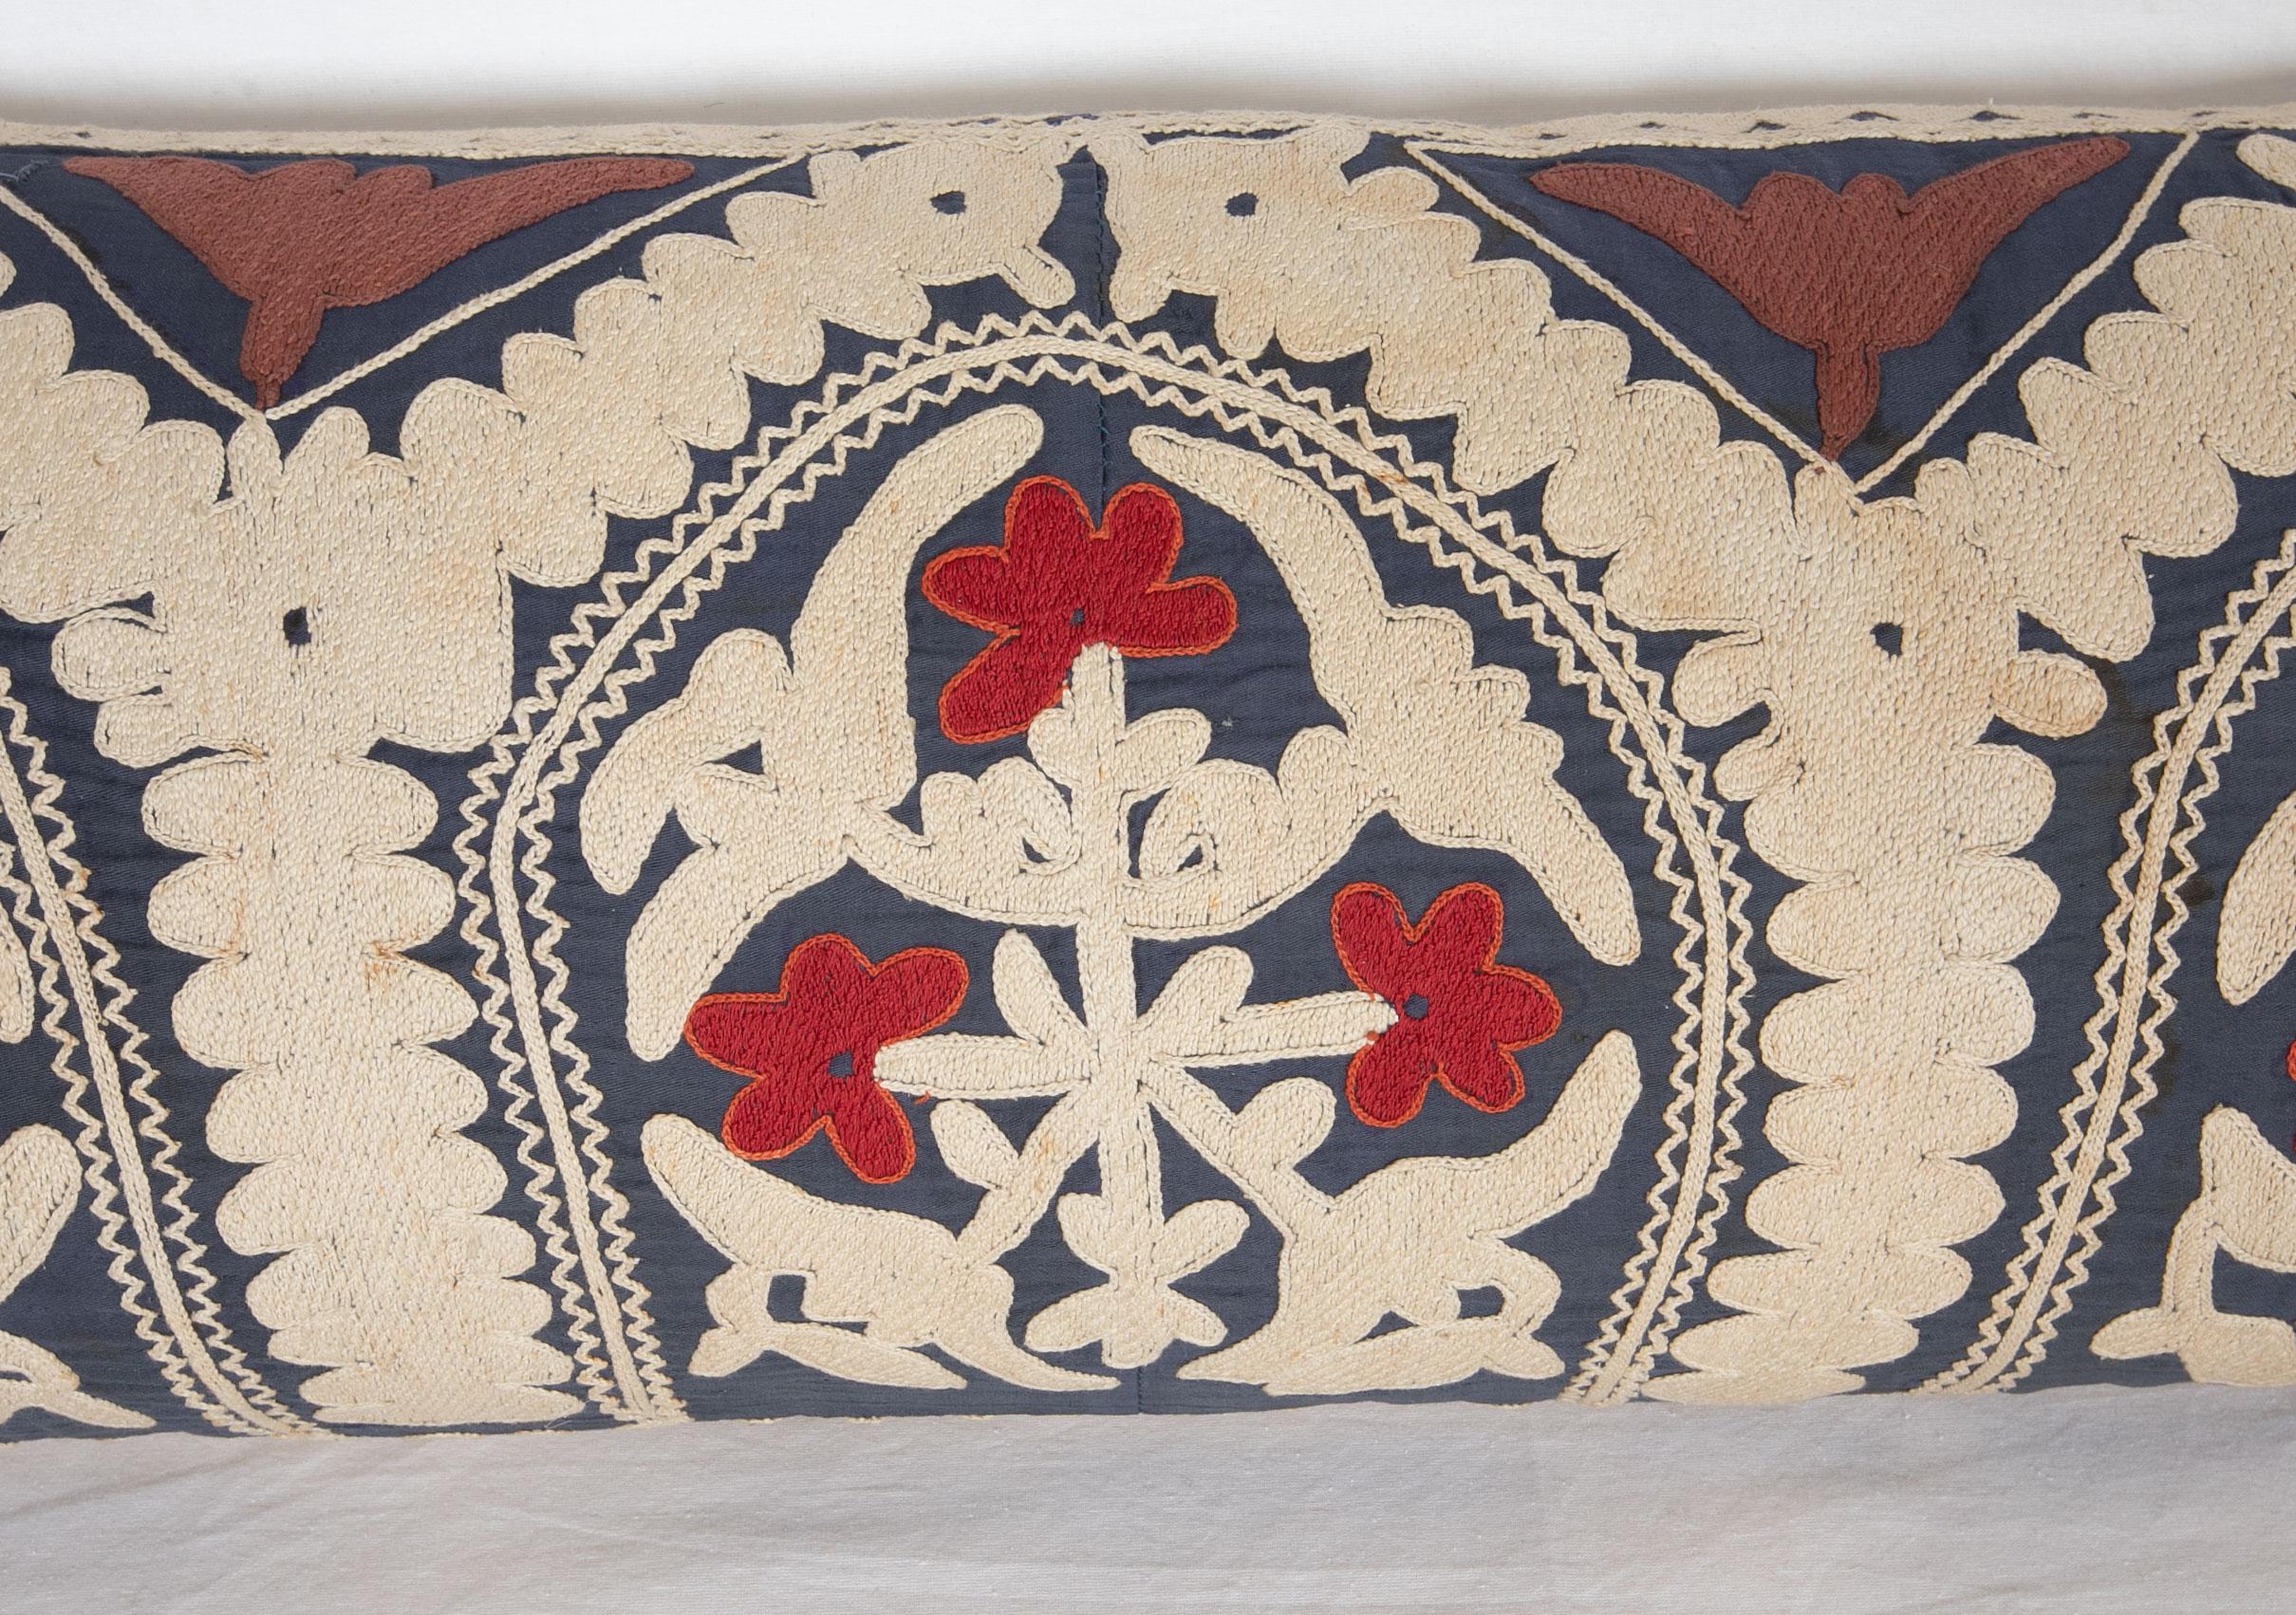 Embroidered Suzani Lumbar Pillow Case Made from a Vintage Uzbek Suzani, Mid-20th Century